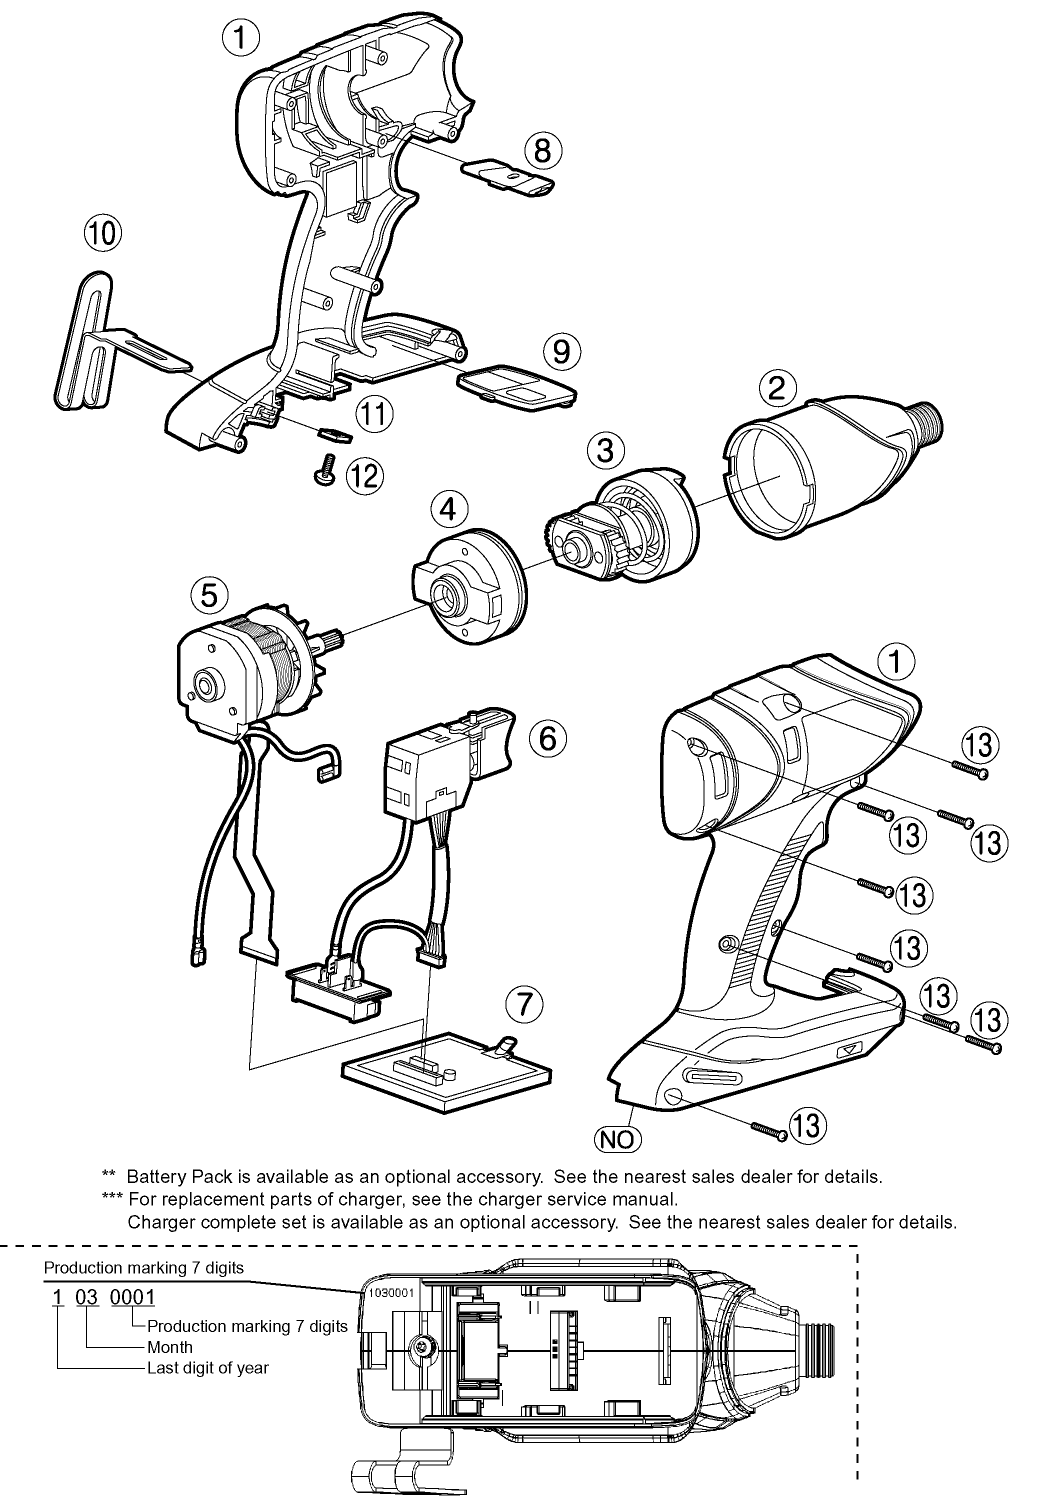 EY7550: Exploded View